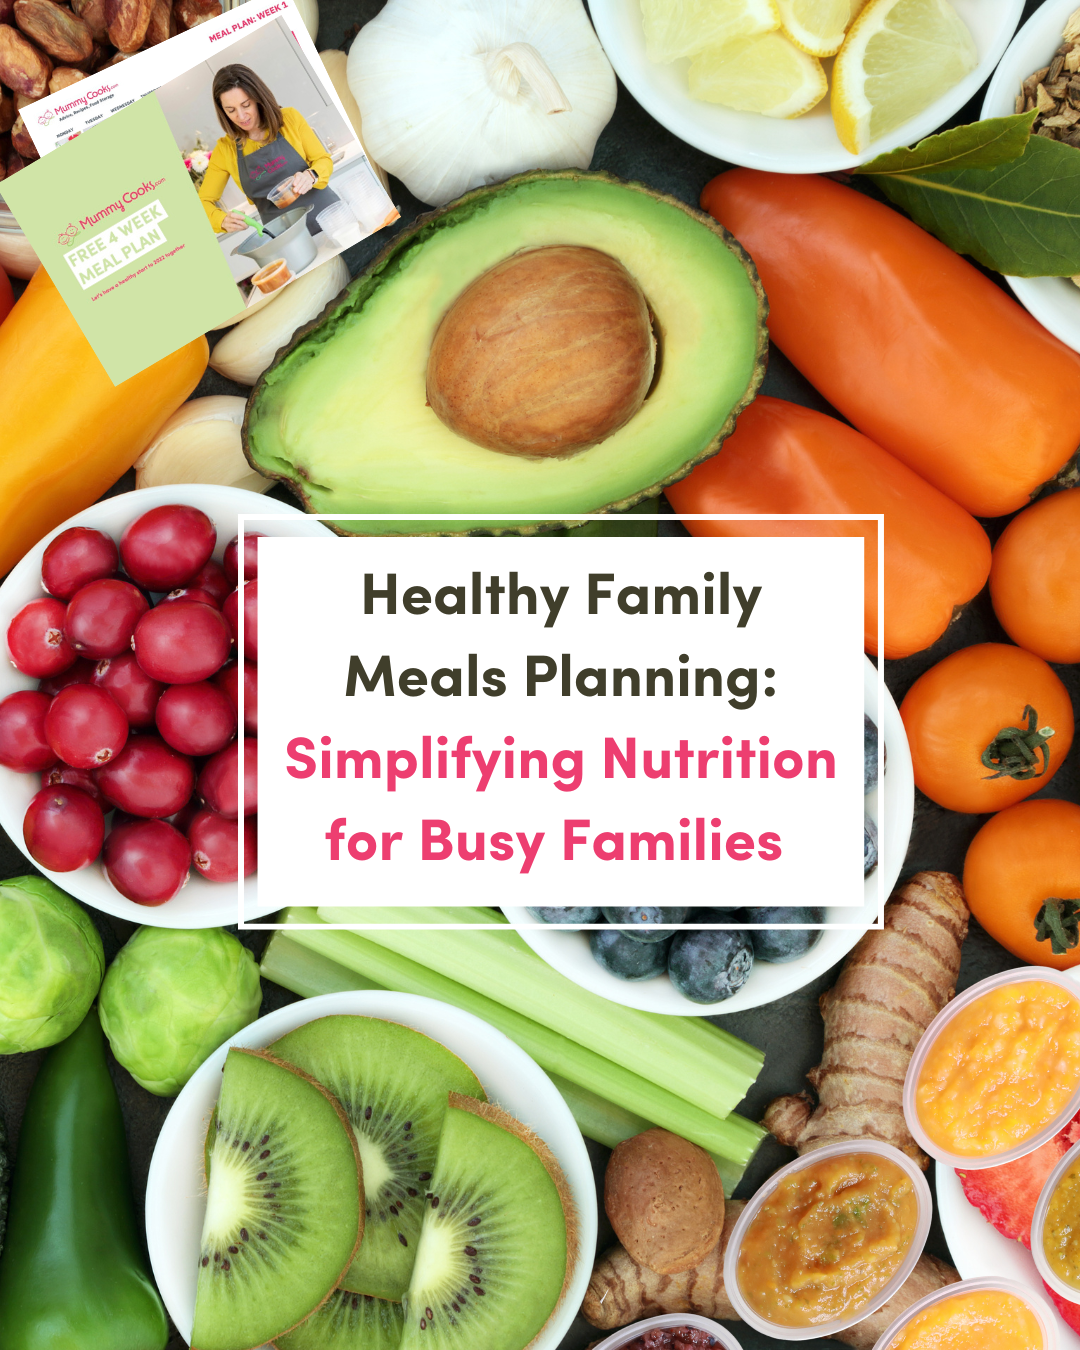 Healthy Family Meals Planning: Simplifying Nutrition for Busy Families